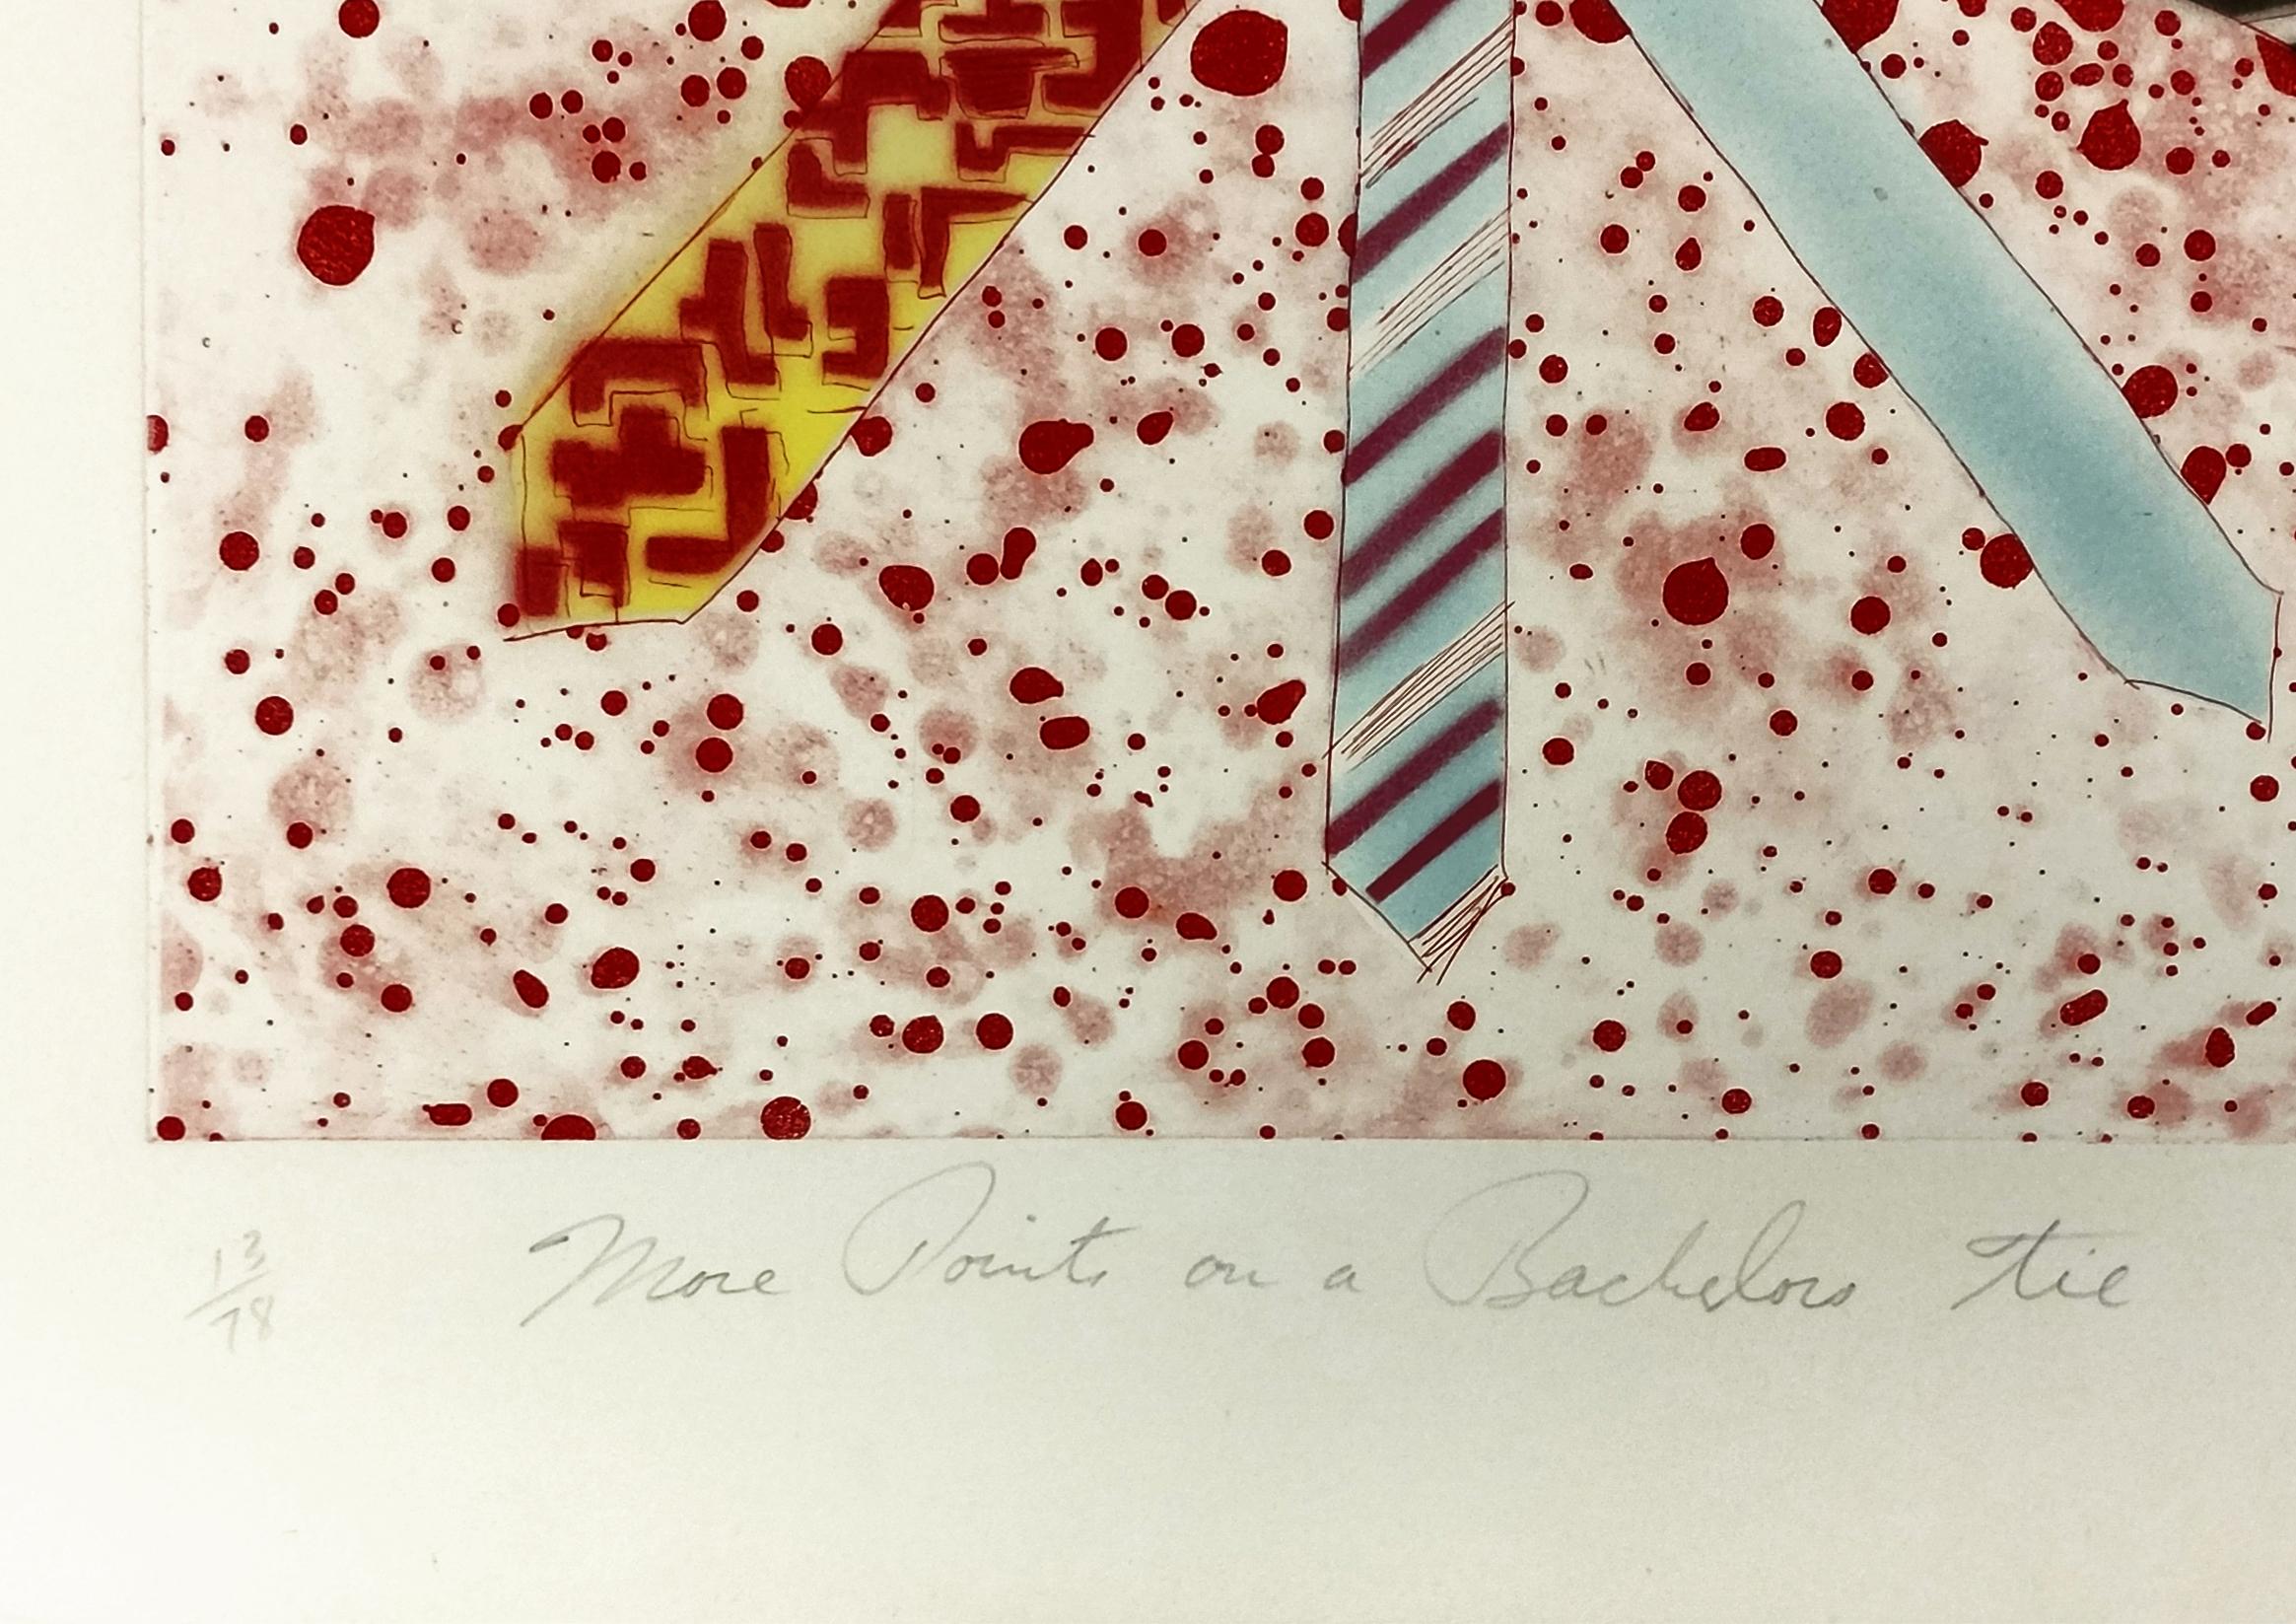 MORE POINTS ON A BACHELOR'S TIE - Print by James Rosenquist